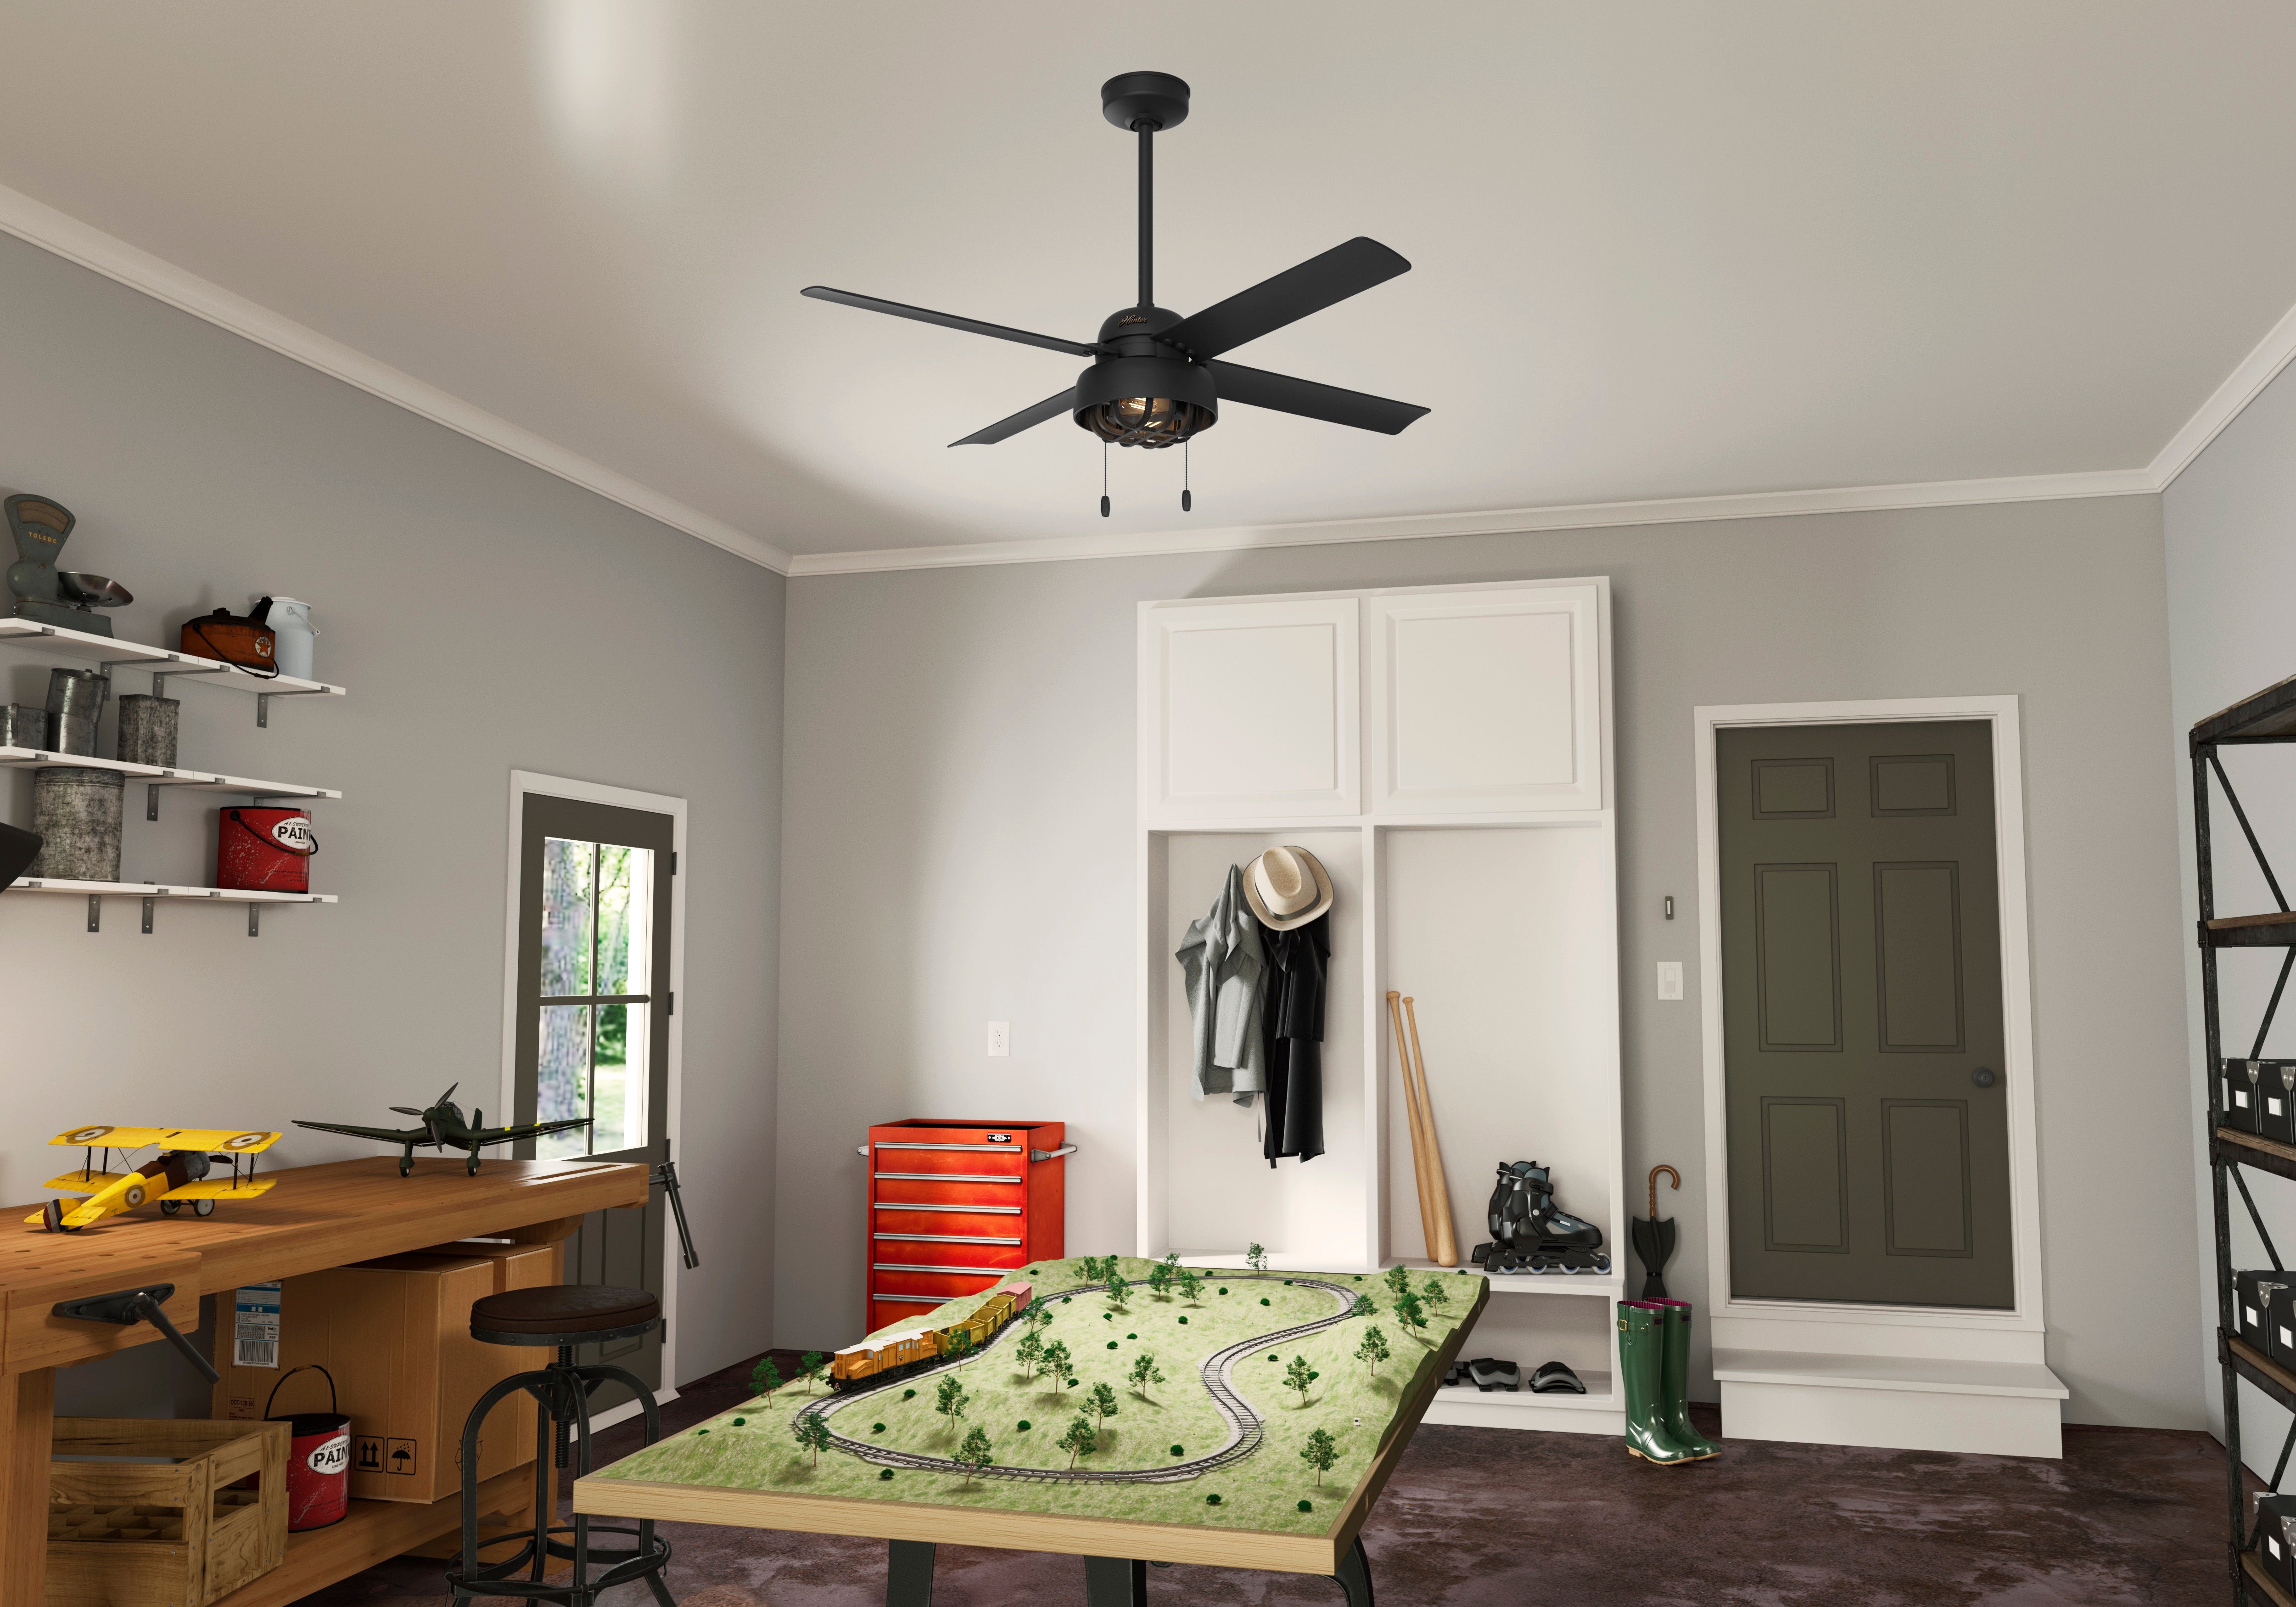 Hunter 52 inch Spring Mill Damp Rated Ceiling Fan with LED Light Kit and Pull Chain